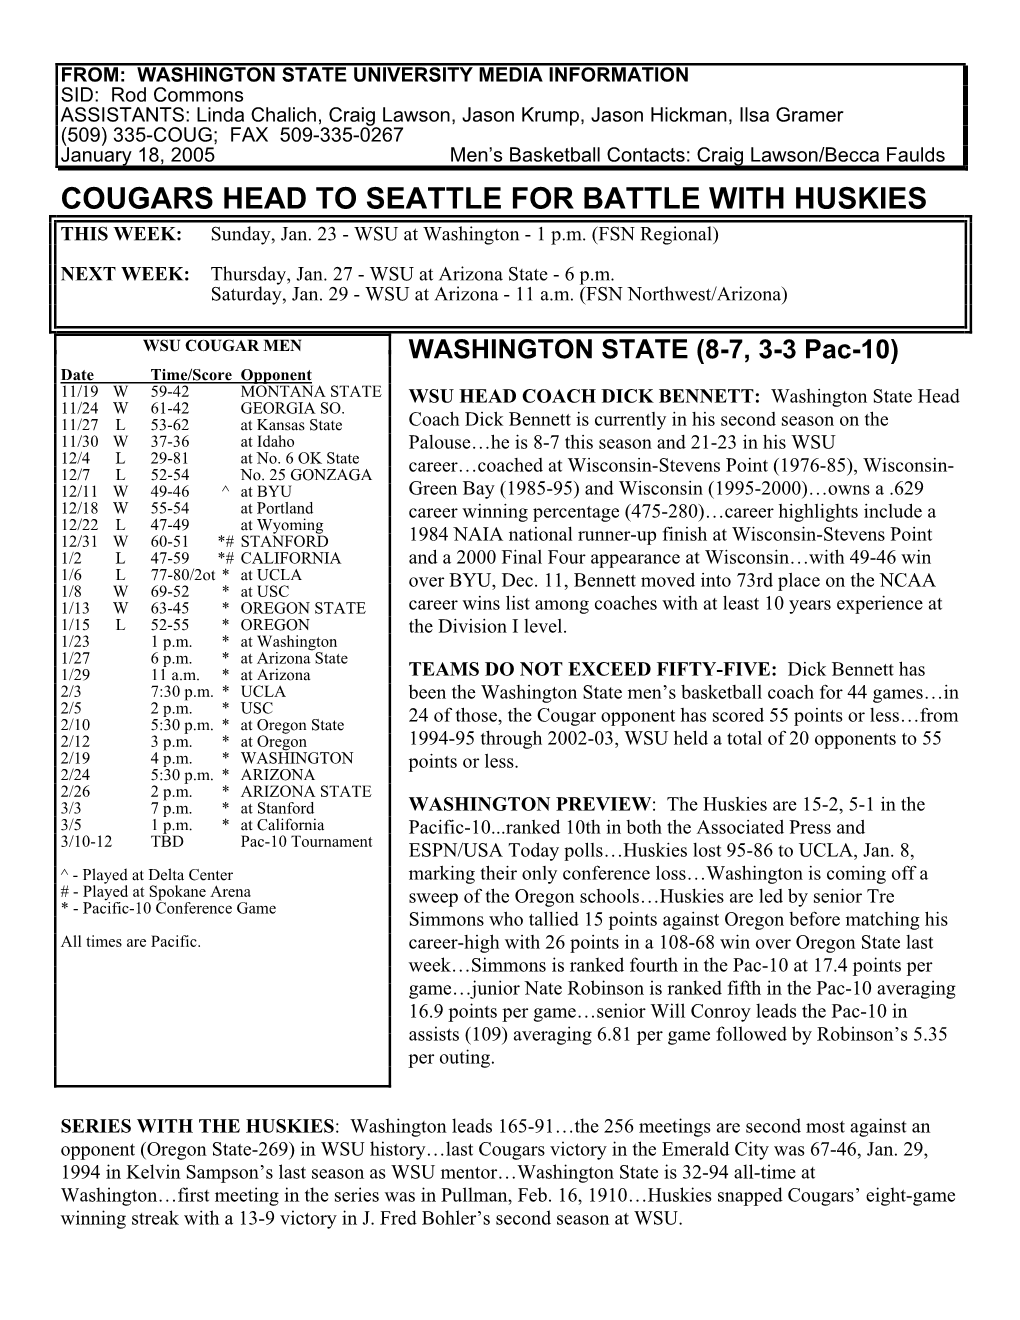 COUGARS HEAD to SEATTLE for BATTLE with HUSKIES THIS WEEK: Sunday, Jan